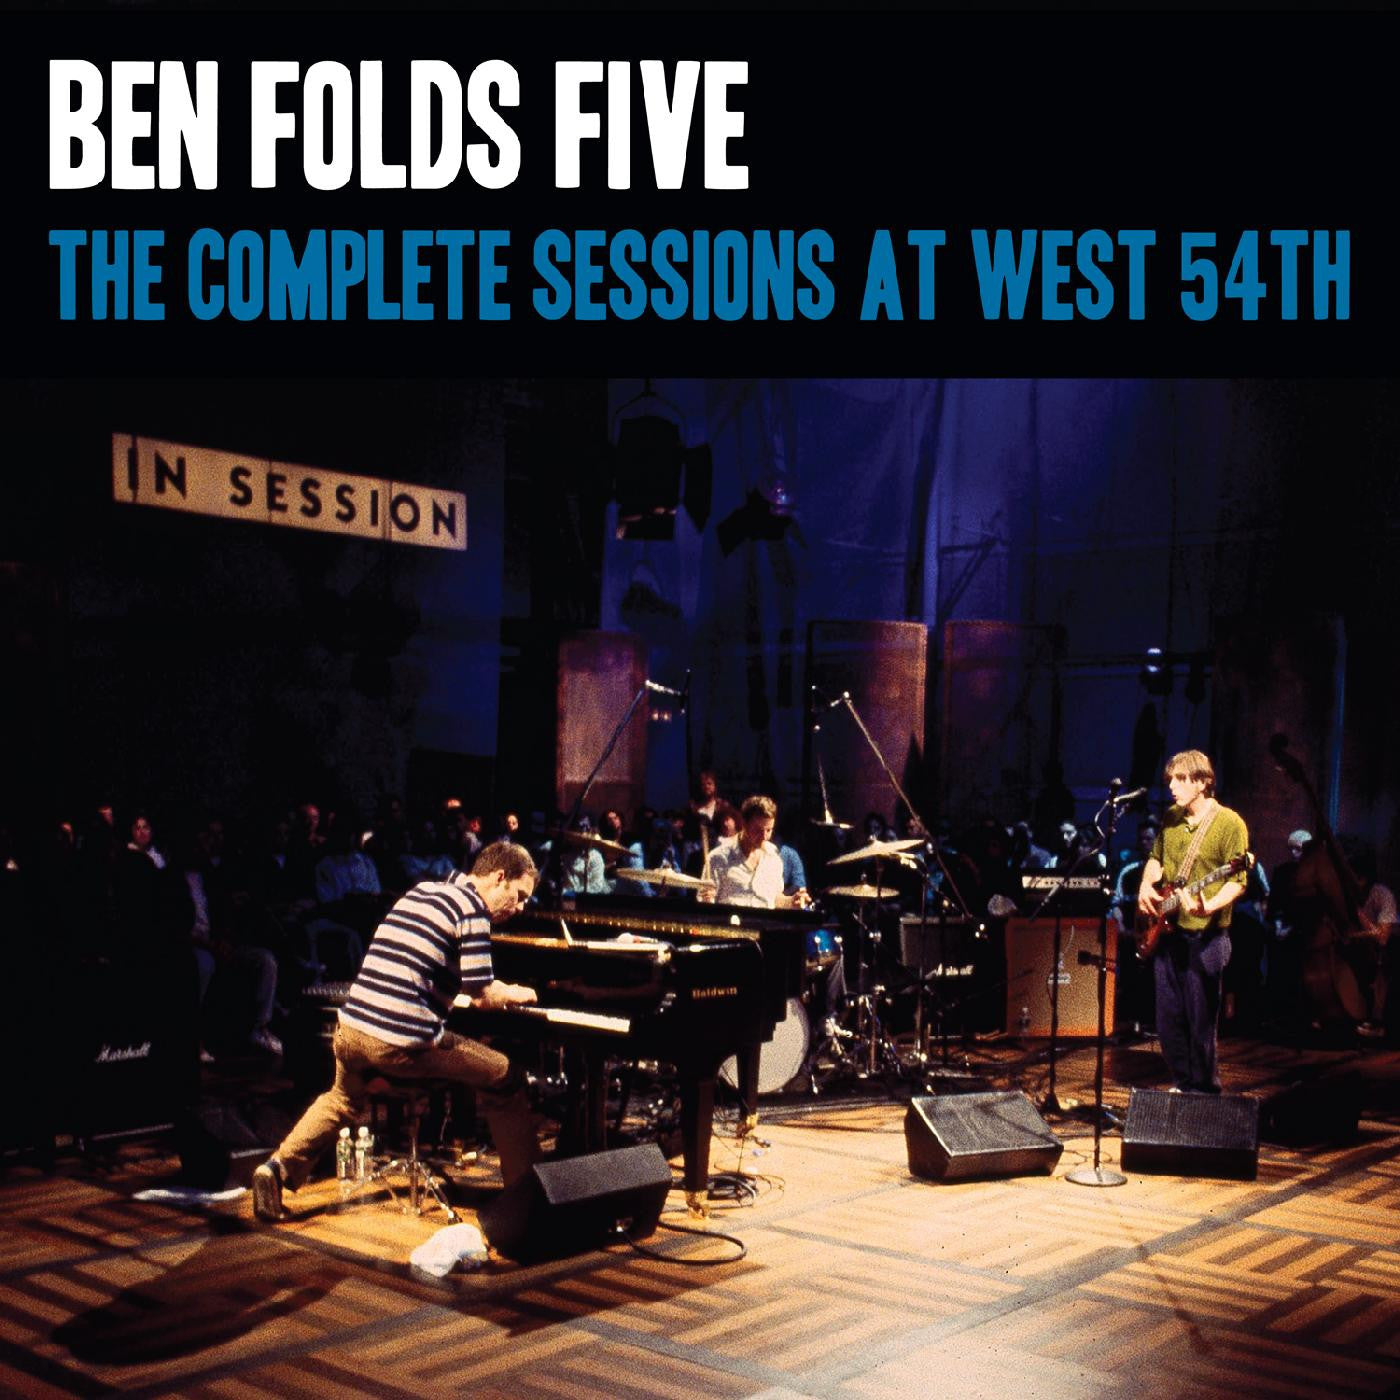 Ben Folds Five - The Complete Sessions at West 54th (Tan & Black "Scuffed Parquet" Vinyl)